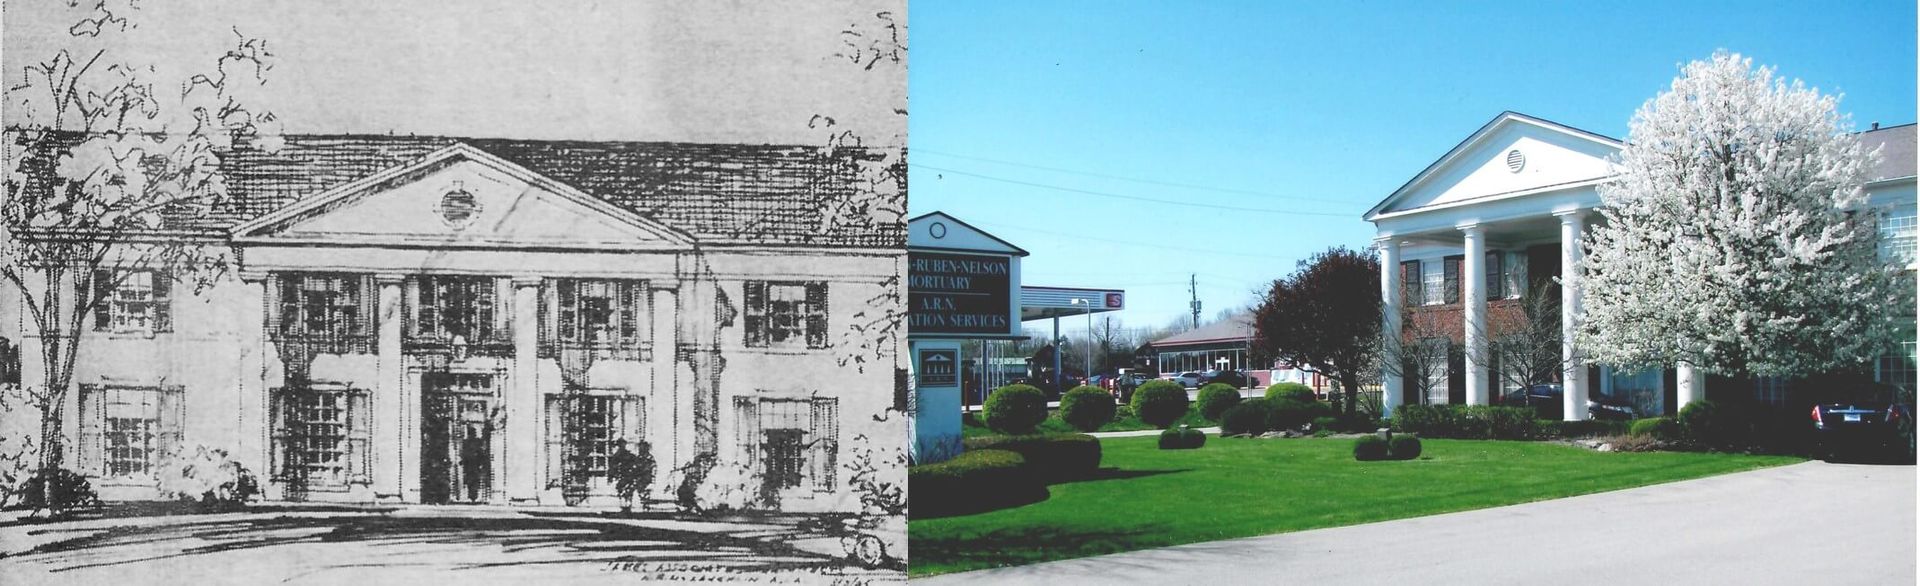 86th street location Aaron-Ruben-Nelson Morutary in IN. Drawing and real photo